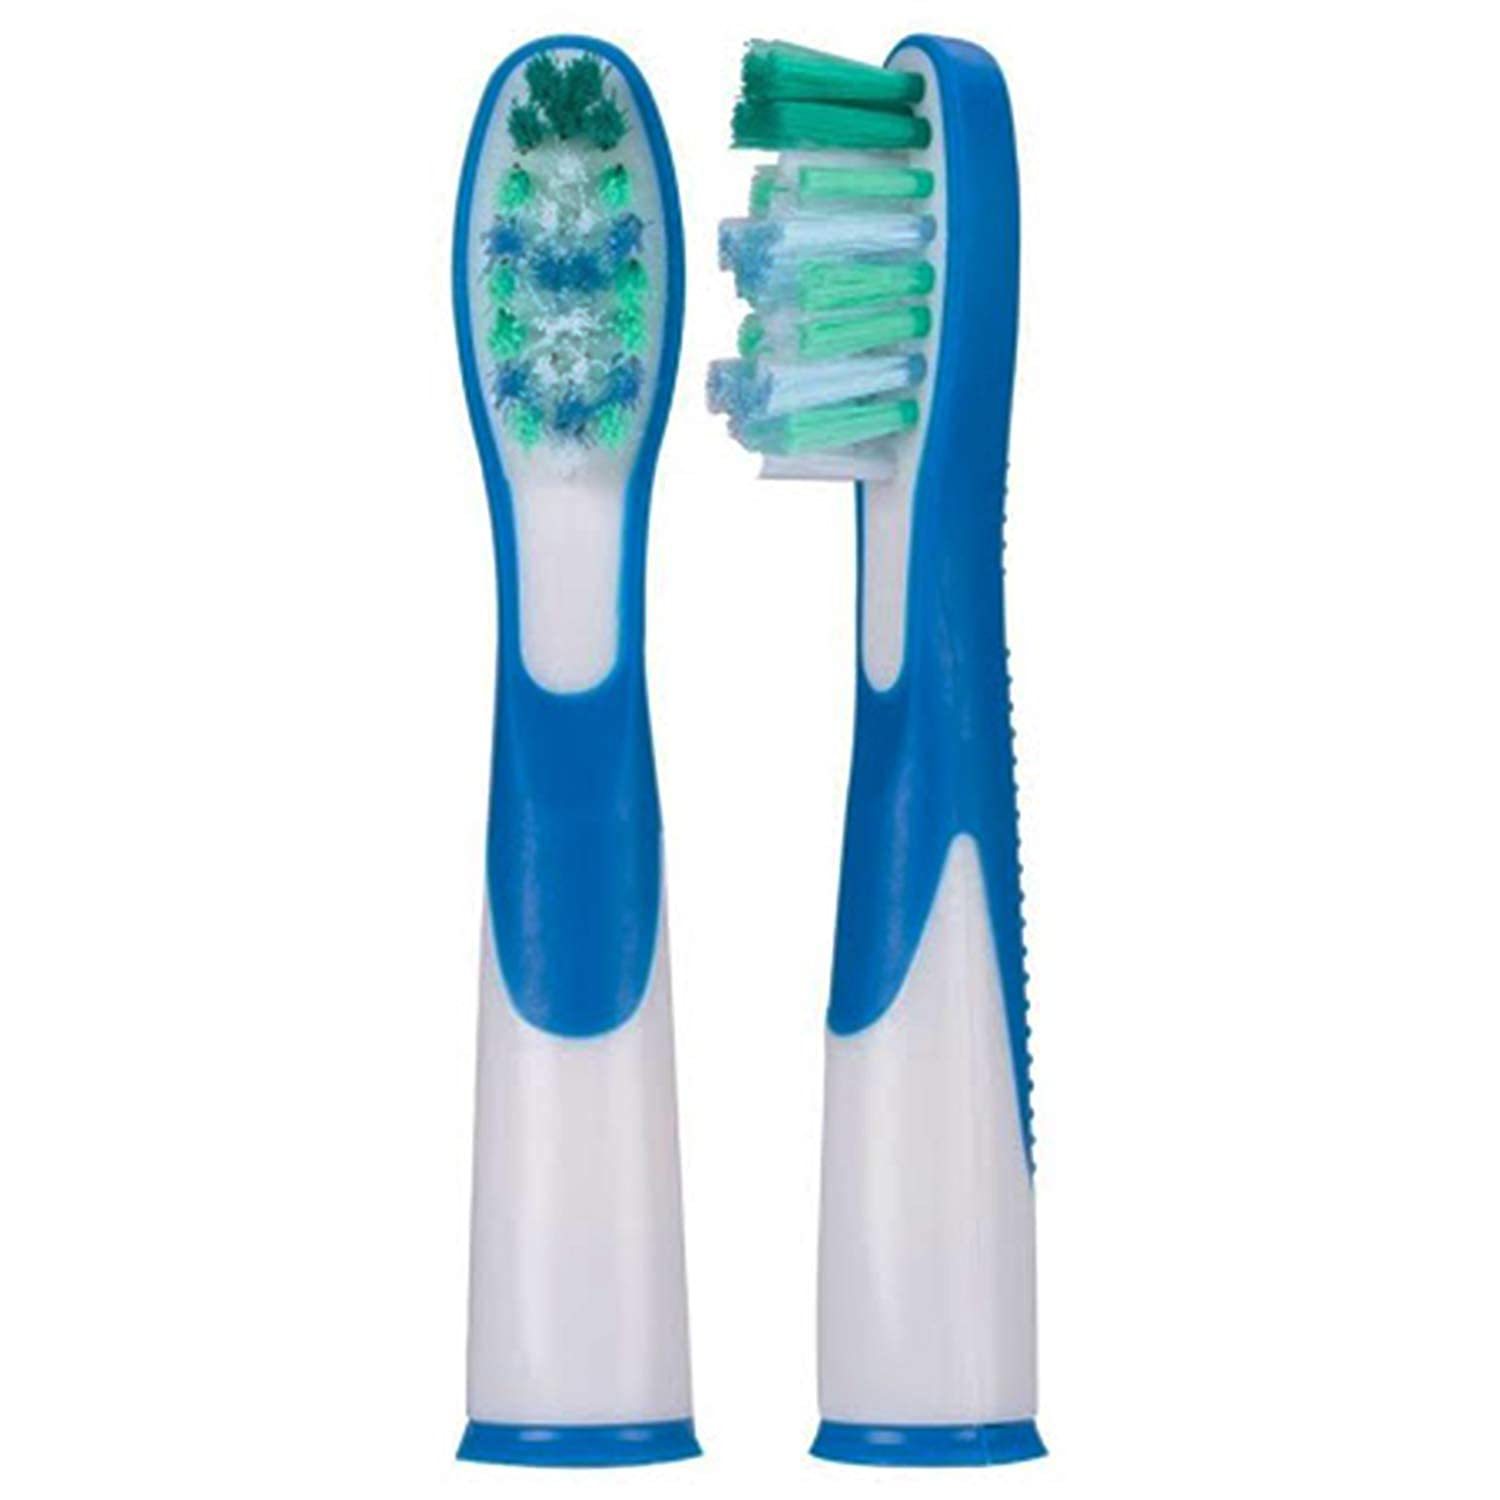 Compatible Replacement Brush Heads for Oral B Sonic Complete & Vitality Sonic - $6.98